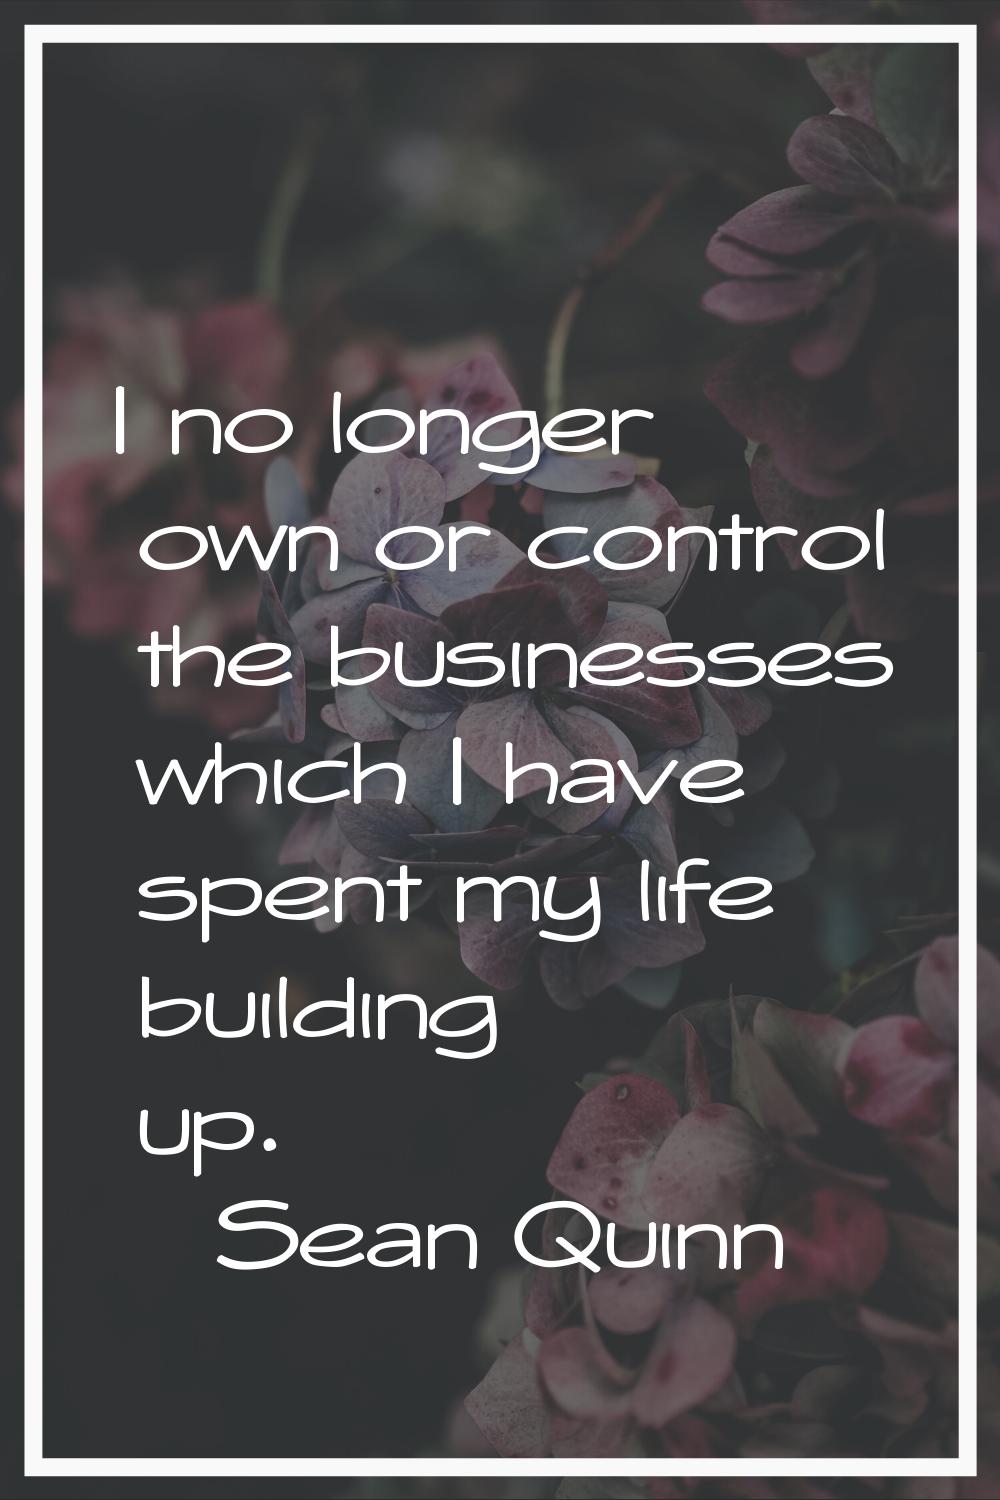 I no longer own or control the businesses which I have spent my life building up.